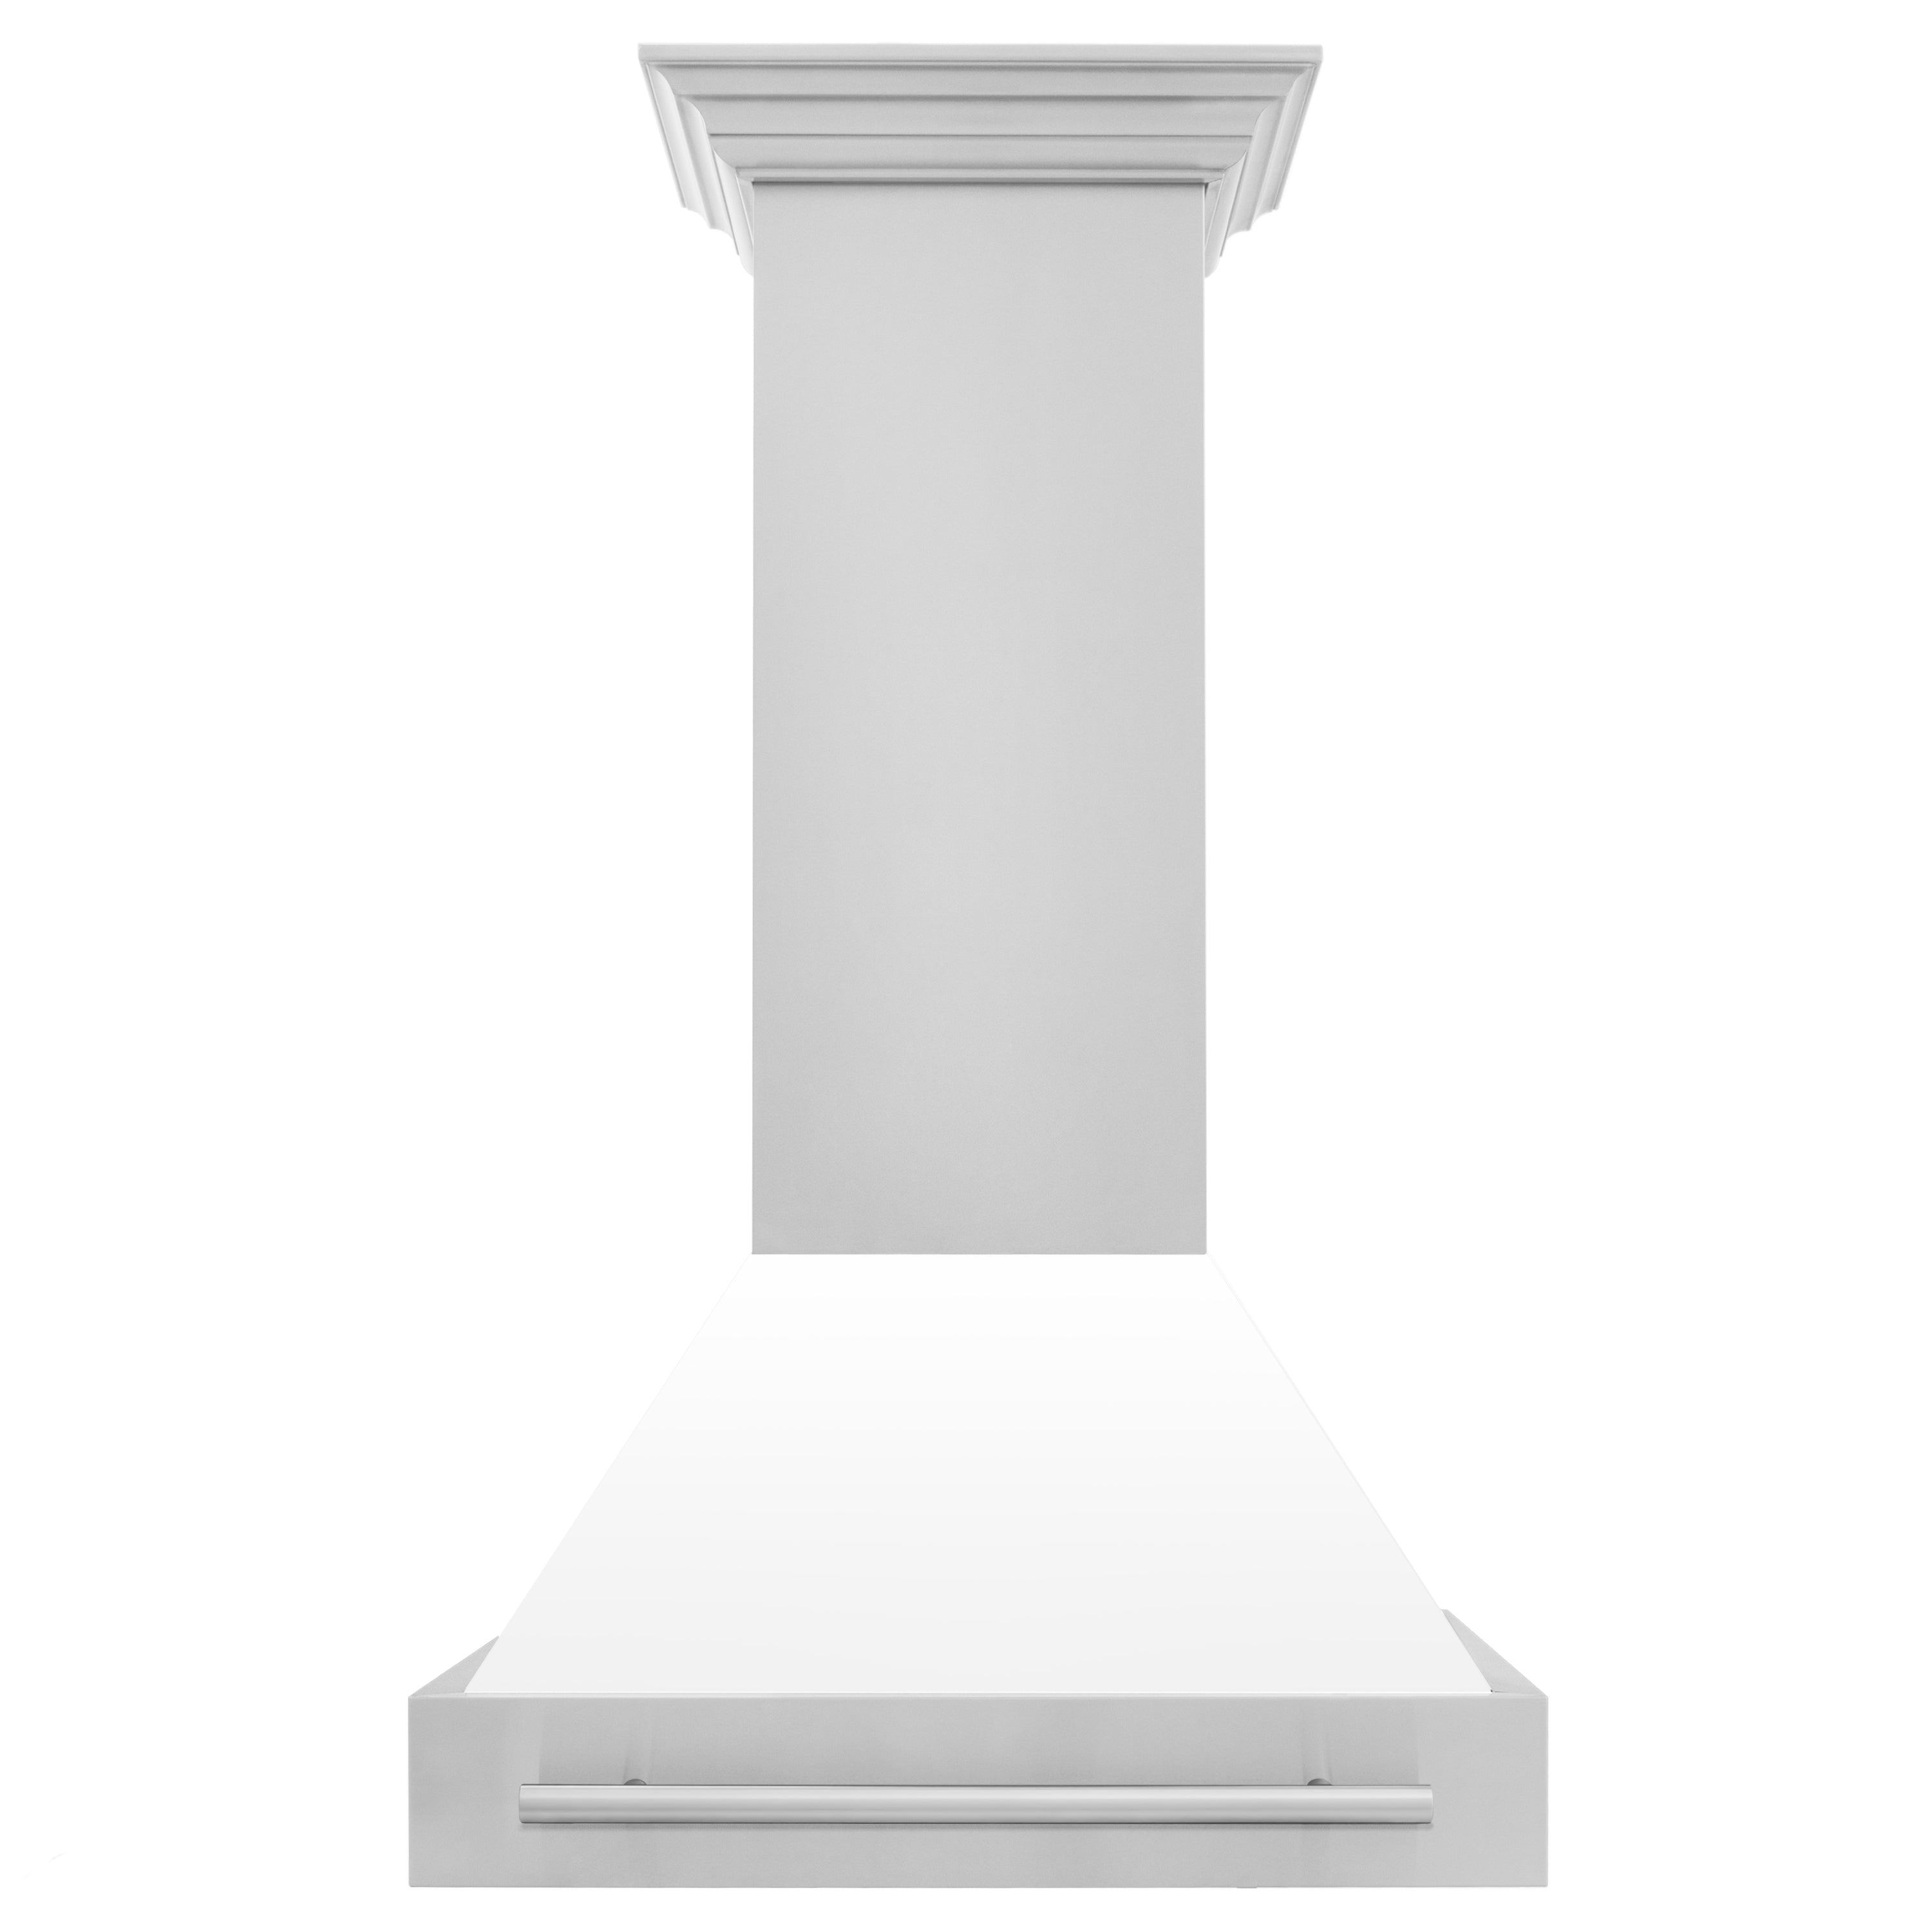 ZLINE 30" Stainless Steel Range Hood with White Matte Shell and Stainless Steel Handle (8654STX-WM-30)